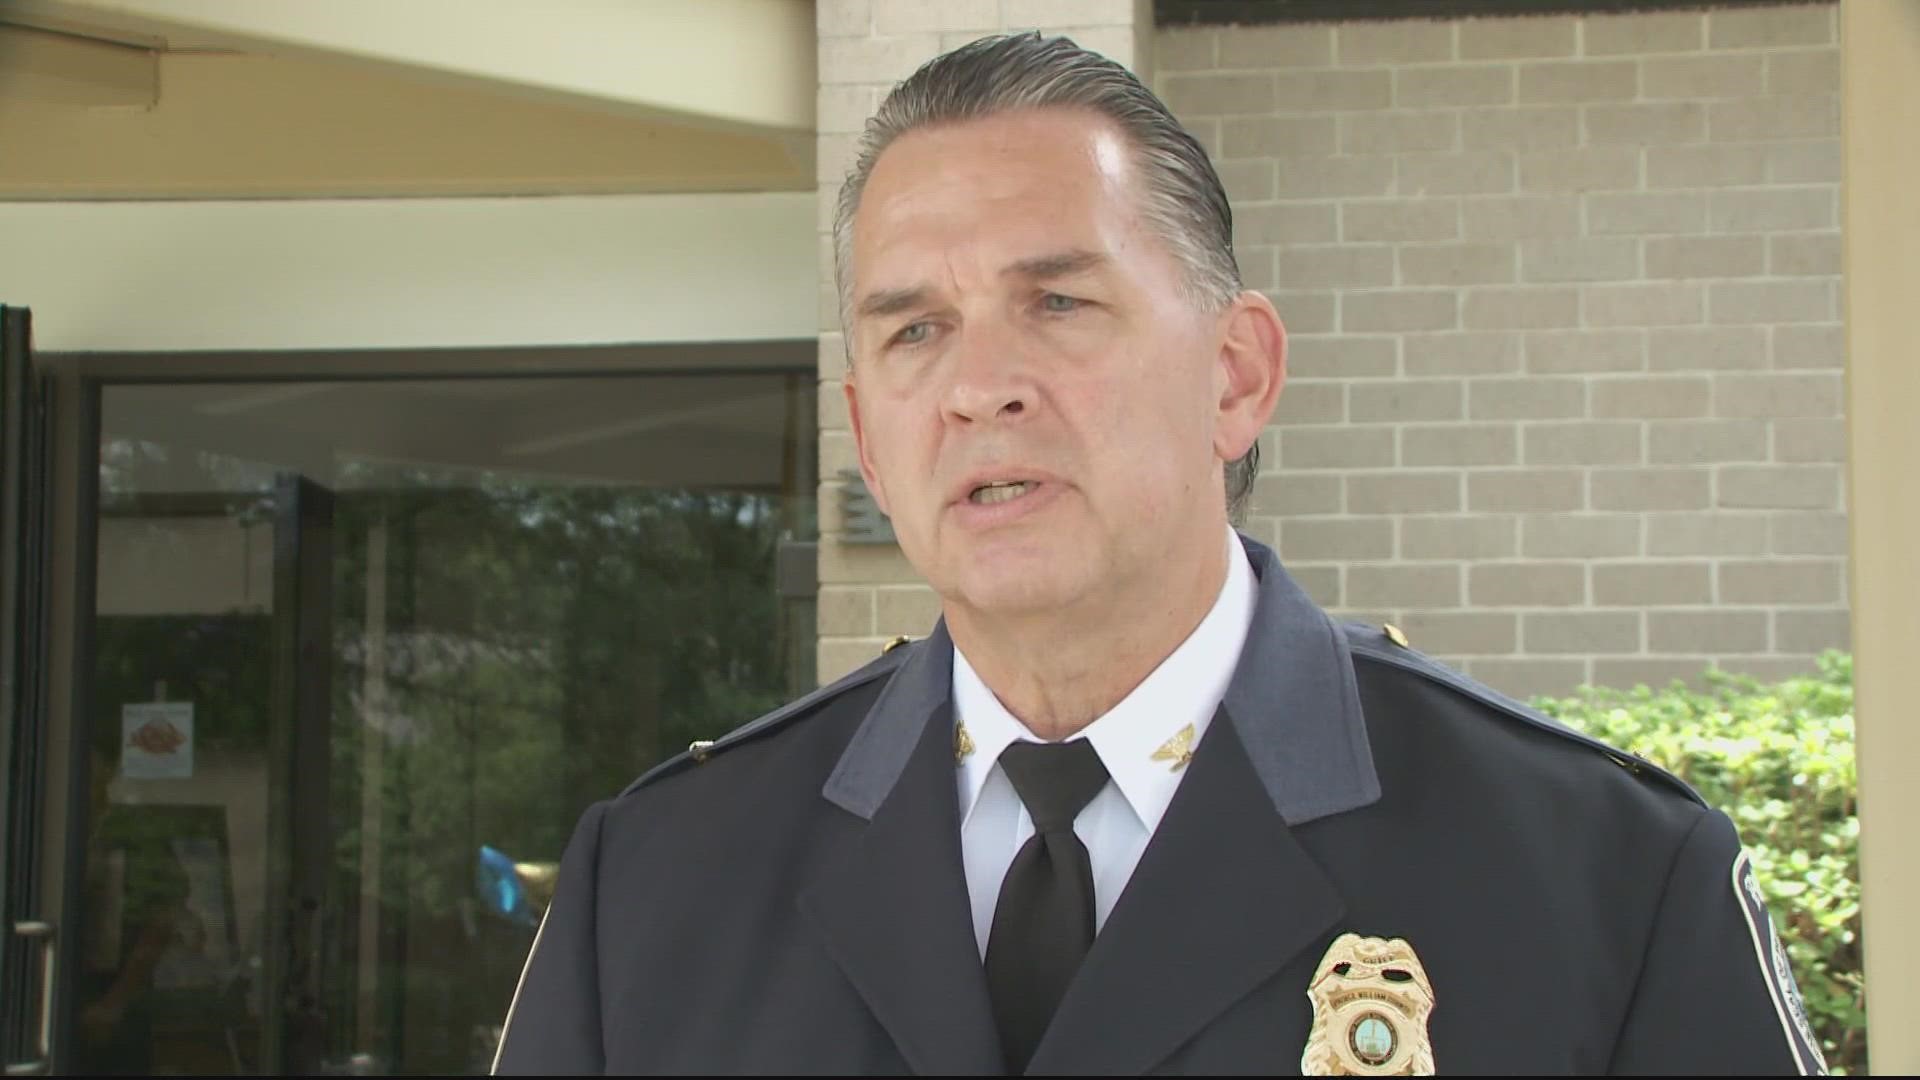 "Our applications are down significantly,” Chief Pete Newsham said.